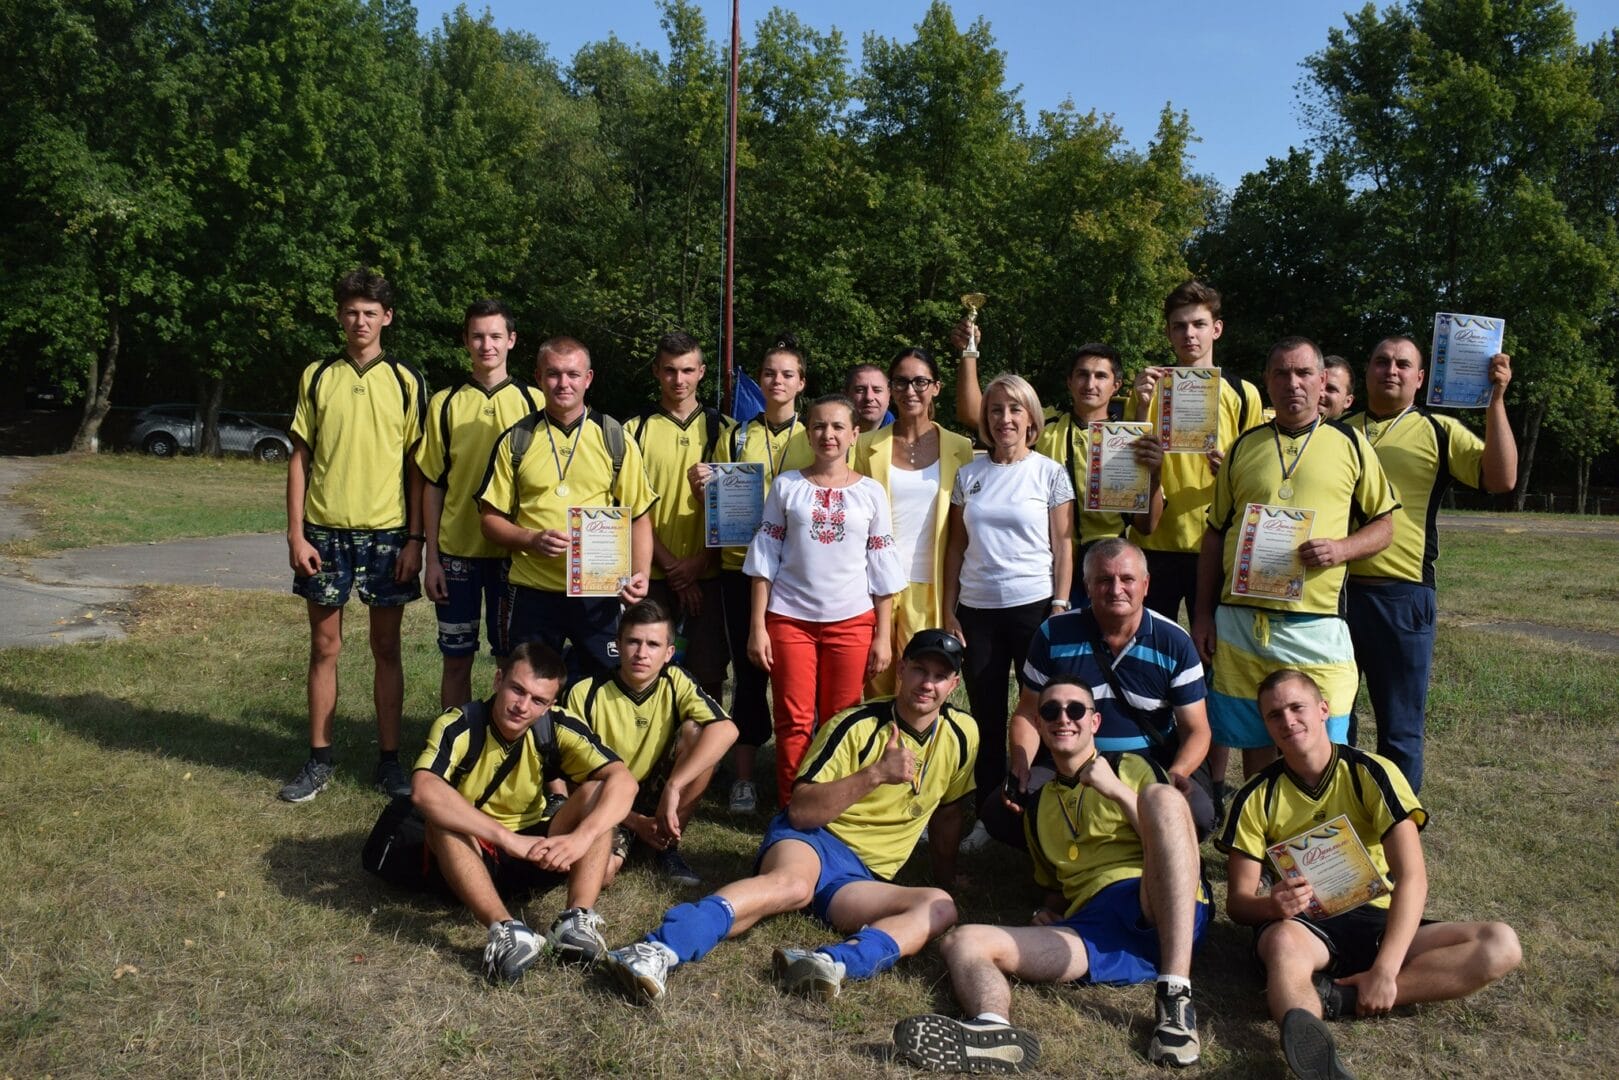 The first Spartakiad was held in the village of Anysiv (in the photo, the team from the village of Ivanivka)